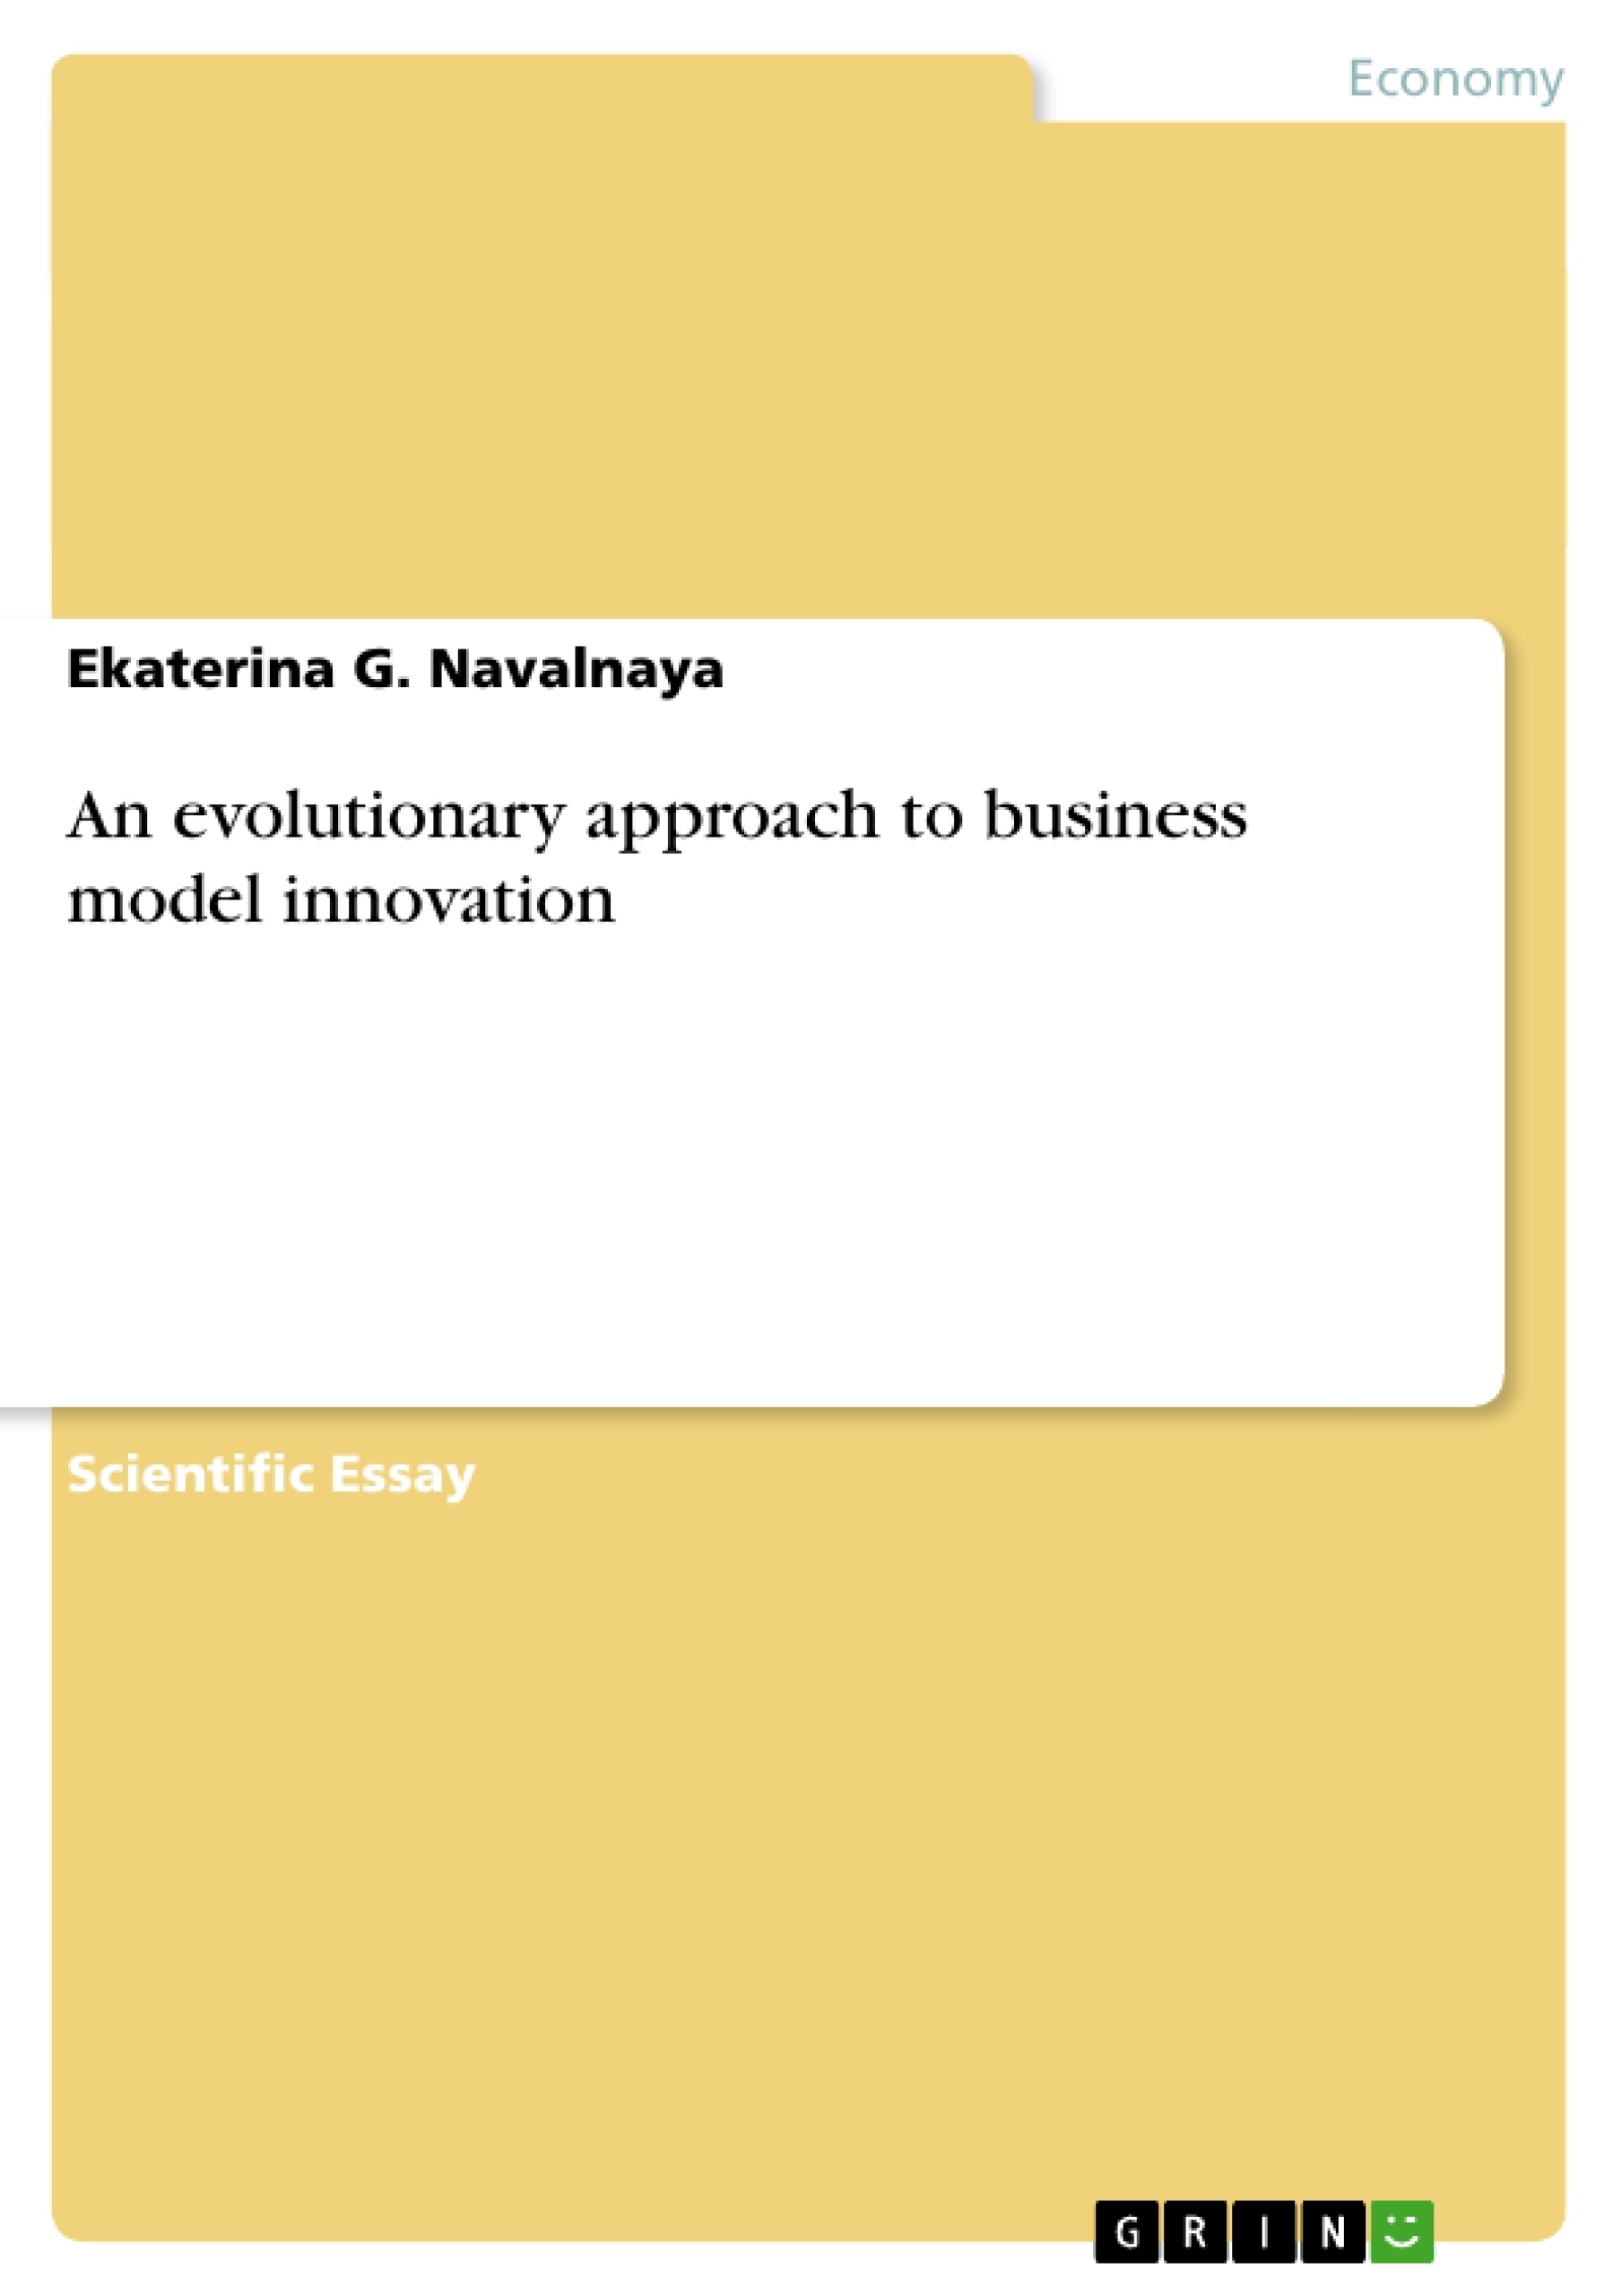 Title: An evolutionary approach to business model innovation